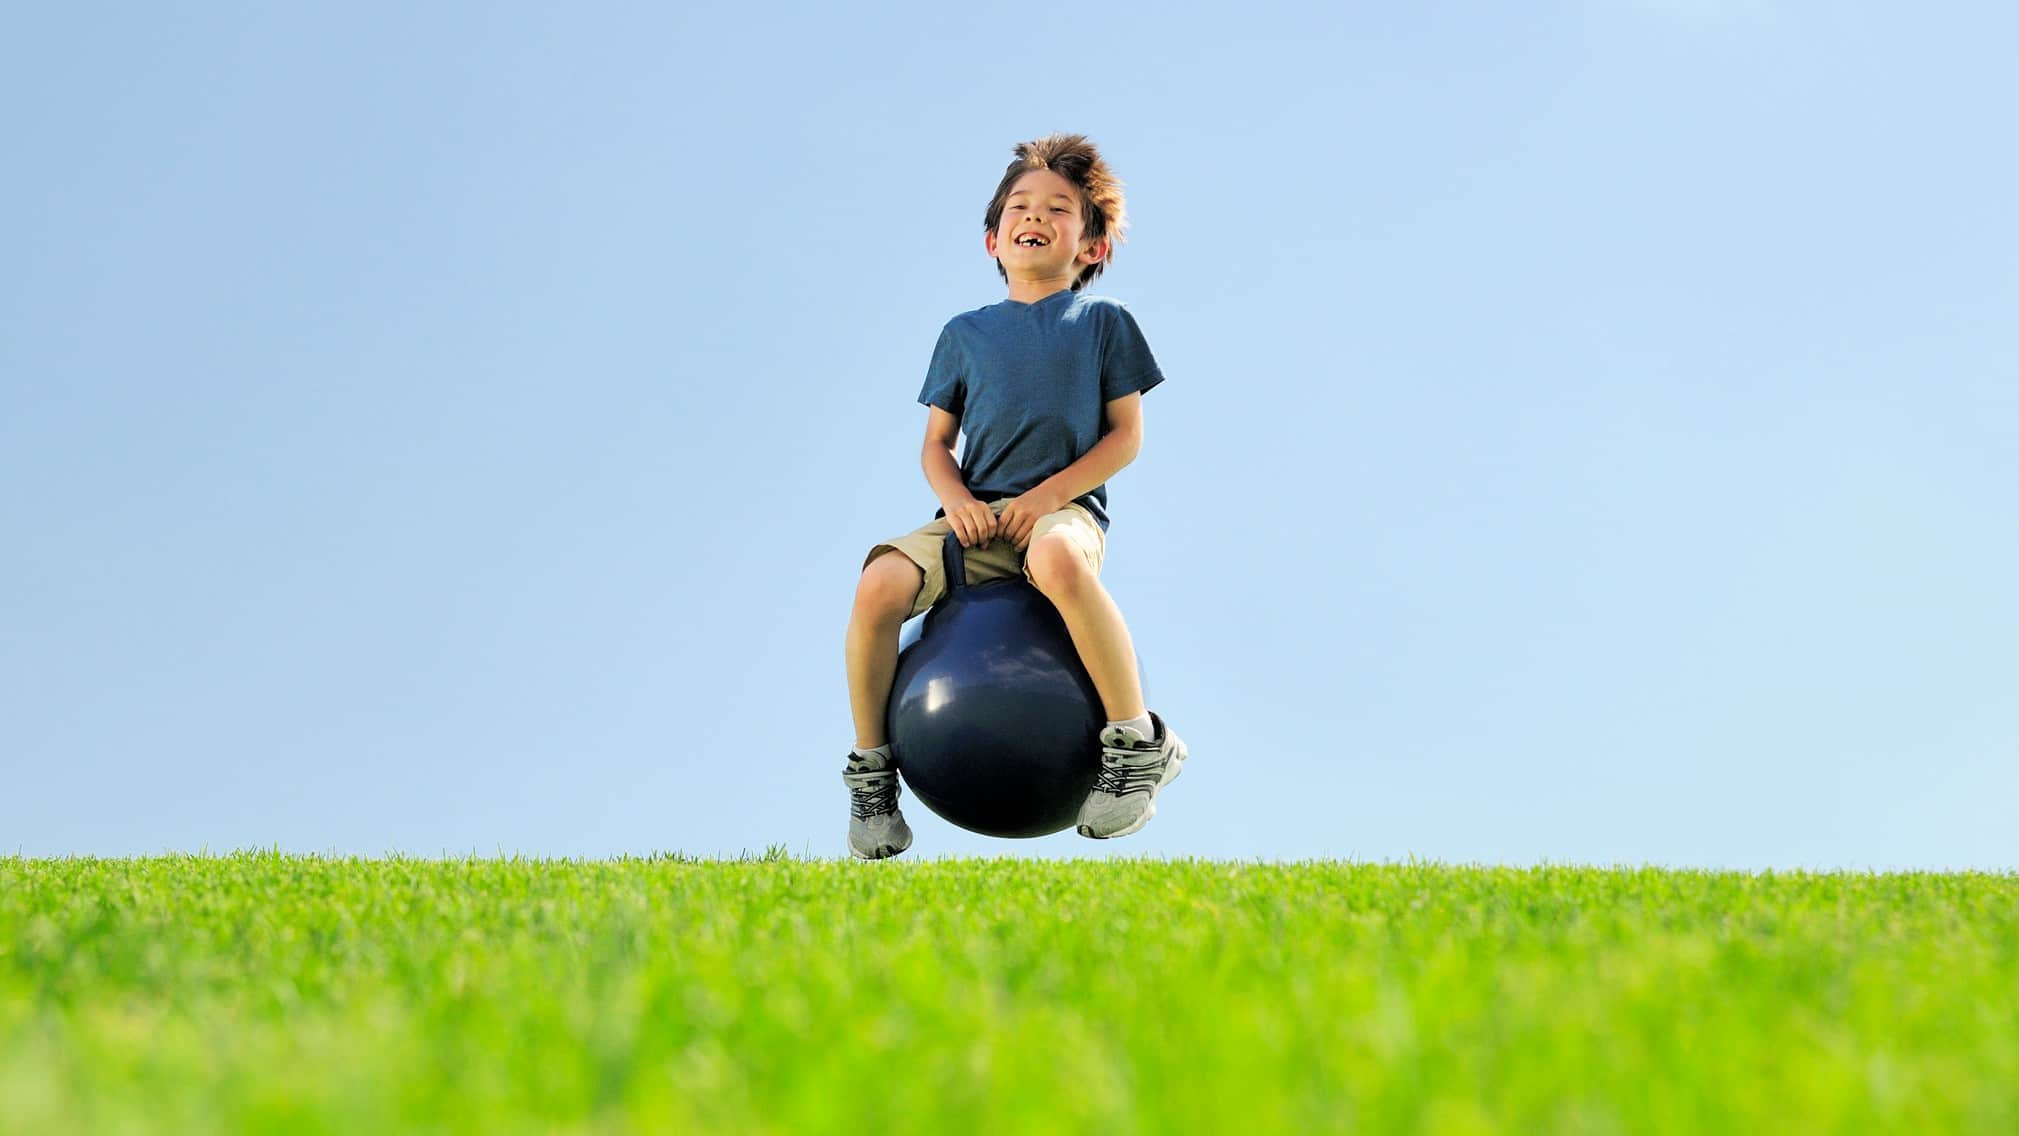 A young boy sits on top of a big rubber bouncing ball with handles as he smiles a toothless grin at the camera and bounces above the ground in a grassy field with a blue sky.